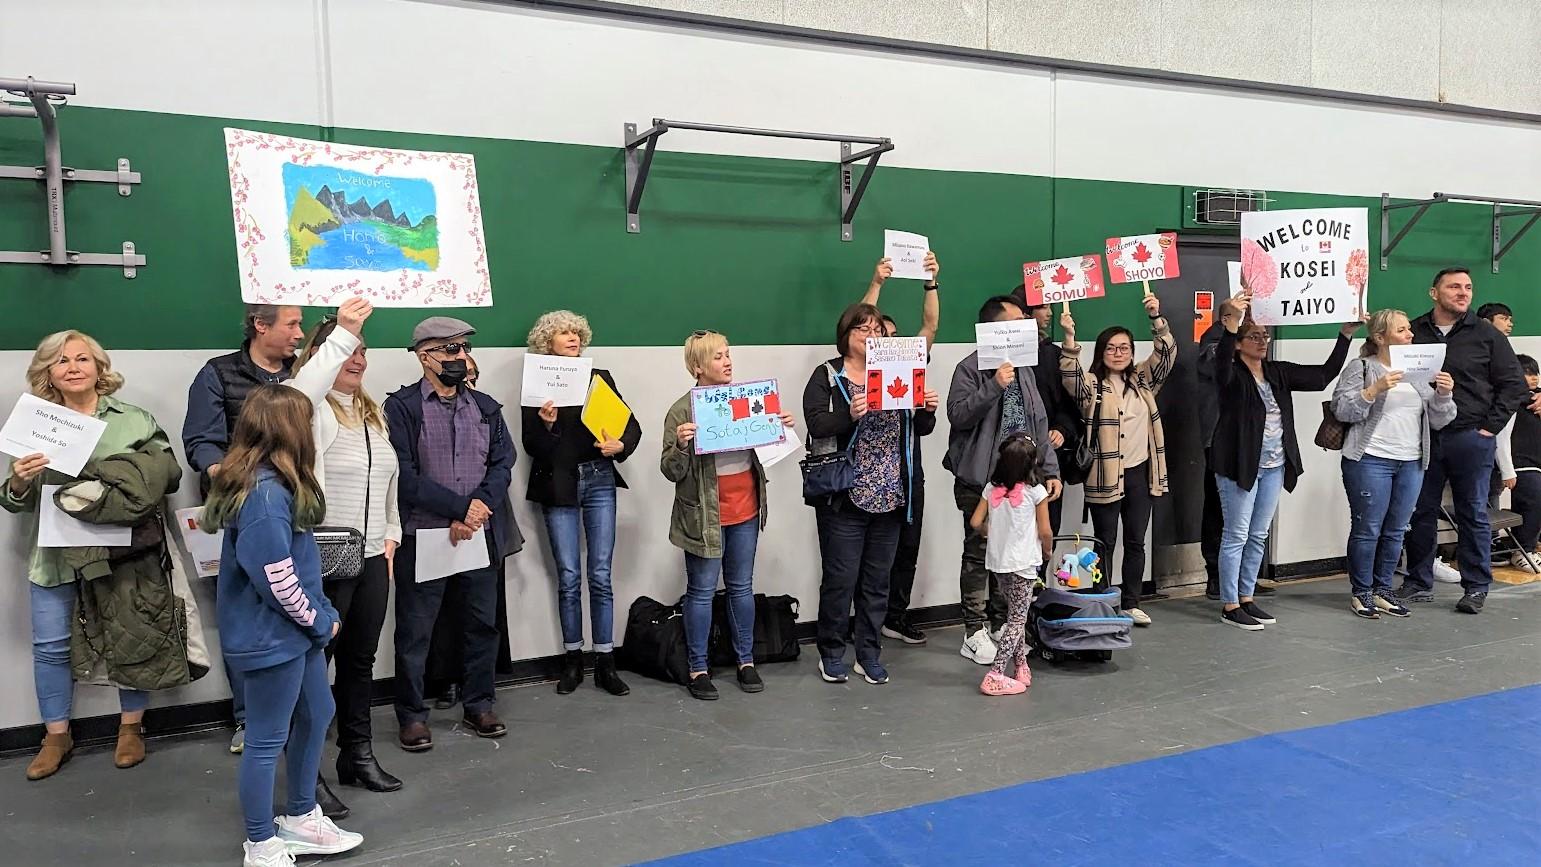 Canadian families welcome Japanese exchange students